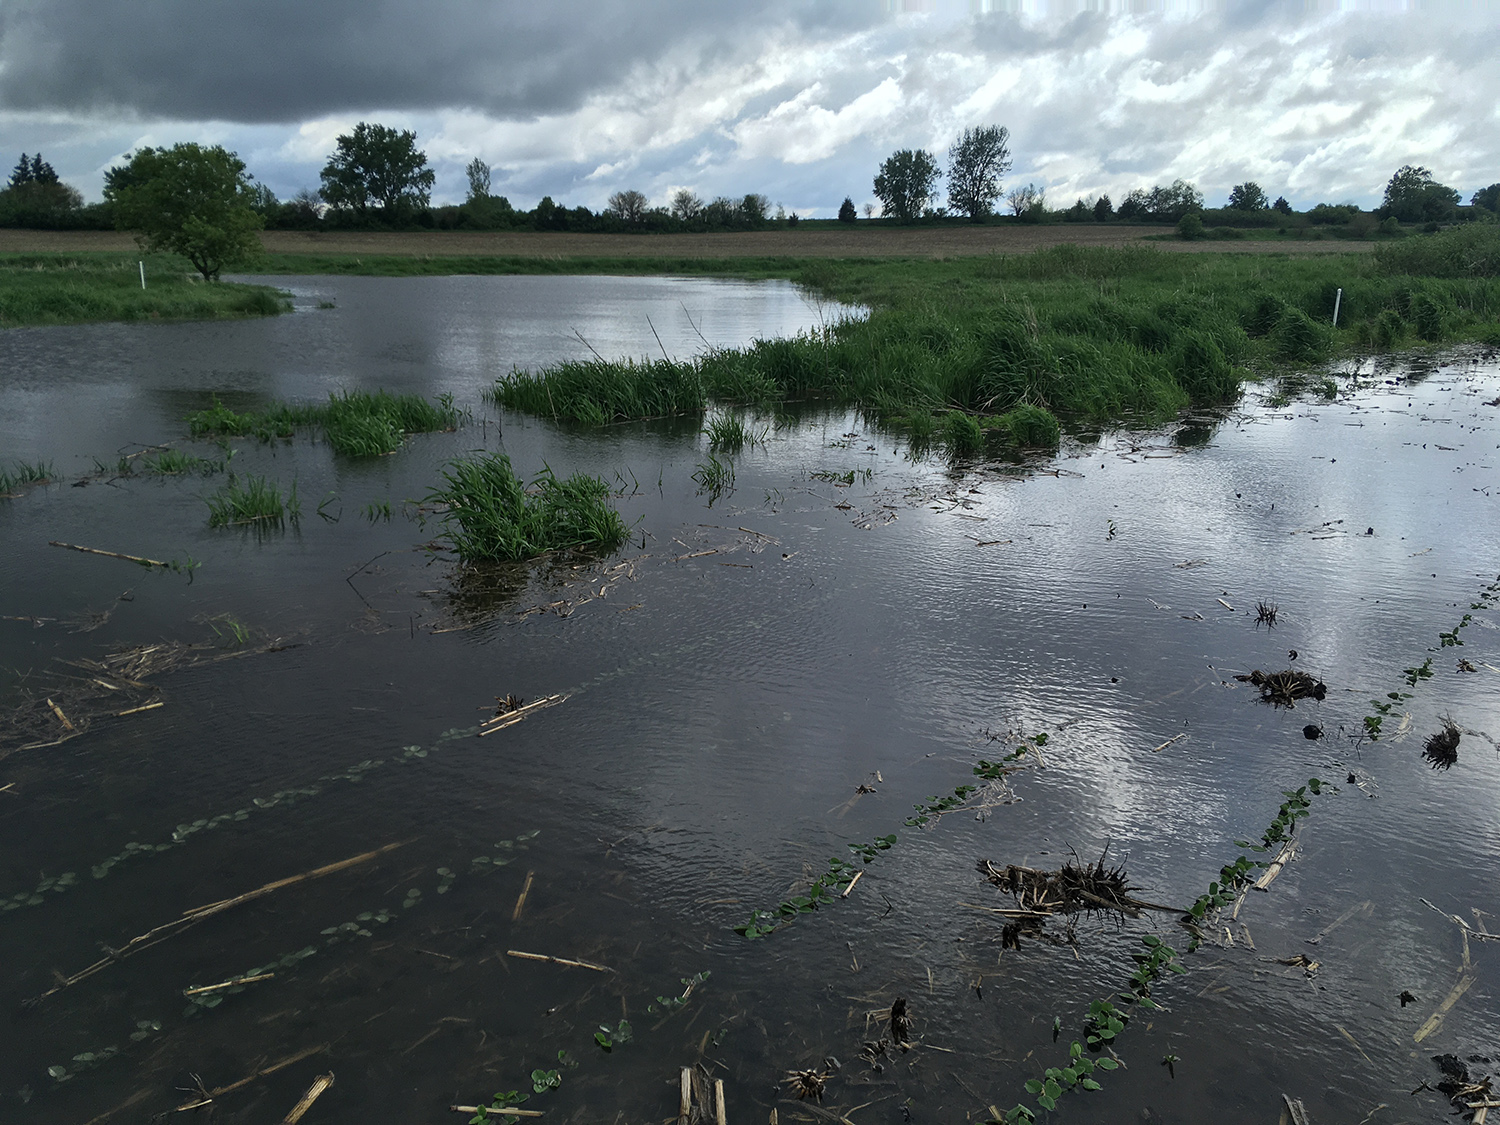 Flood waters connected the oxbow to the Boone River and adjacent riparian zone and crop fields. Some monitoring wells were in knee-deep water.